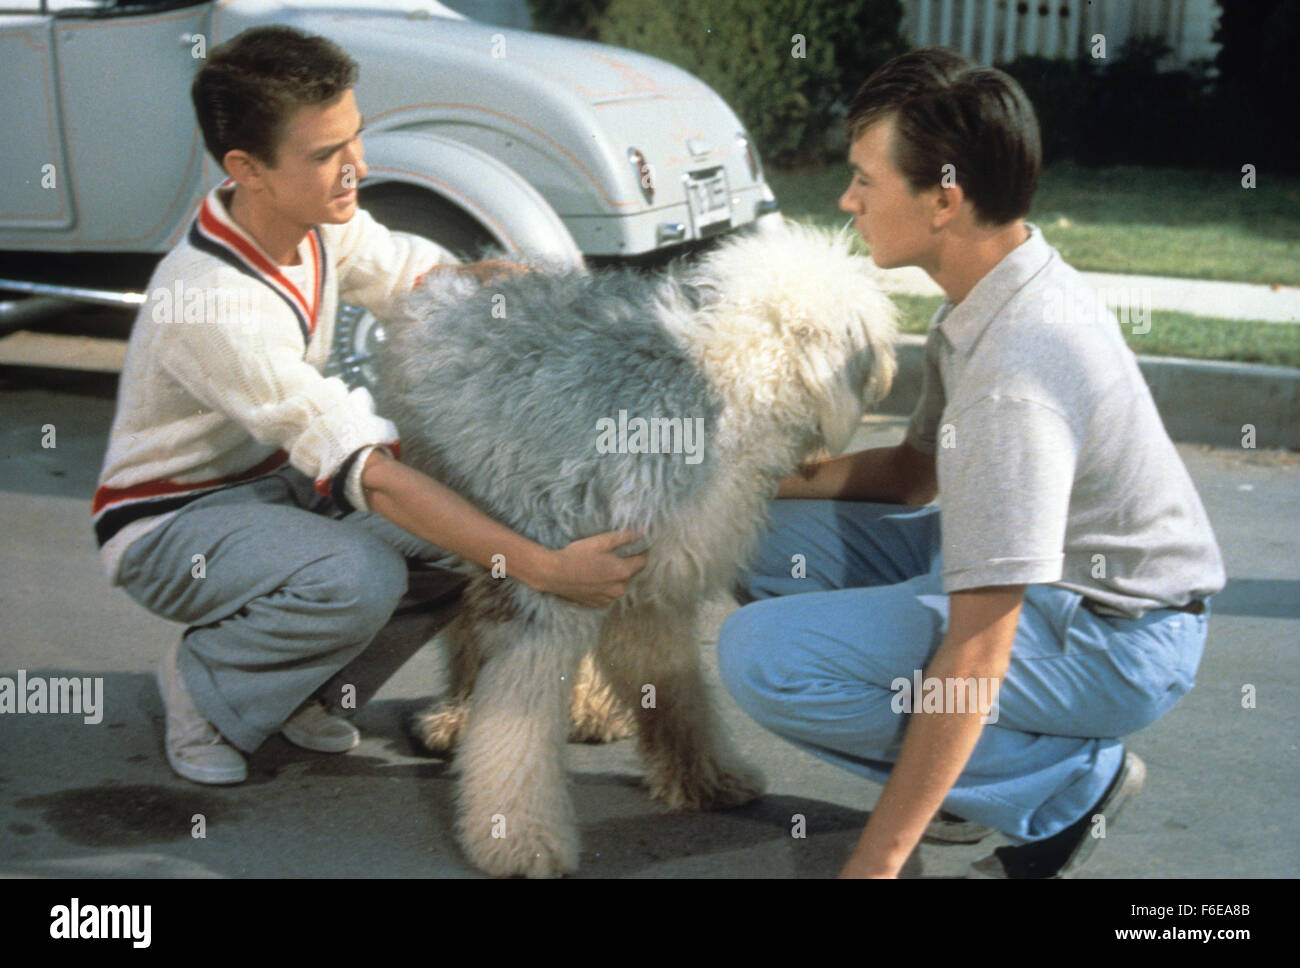 RELEASE DATE: March 19, 1959. MOVIE TITLE: The Shaggy Dog. STUDIO: Walt Disney Productions. PLOT: Through an ancient spell, a boy changes into a sheepdog and back again. It seems to happen at inopportune times and the spell can only be broken by an act of bravery. PICTURED: FRED MACMURRY as Wilson Daniels and TOMMY KIRK as Wilby Daniels. Stock Photo